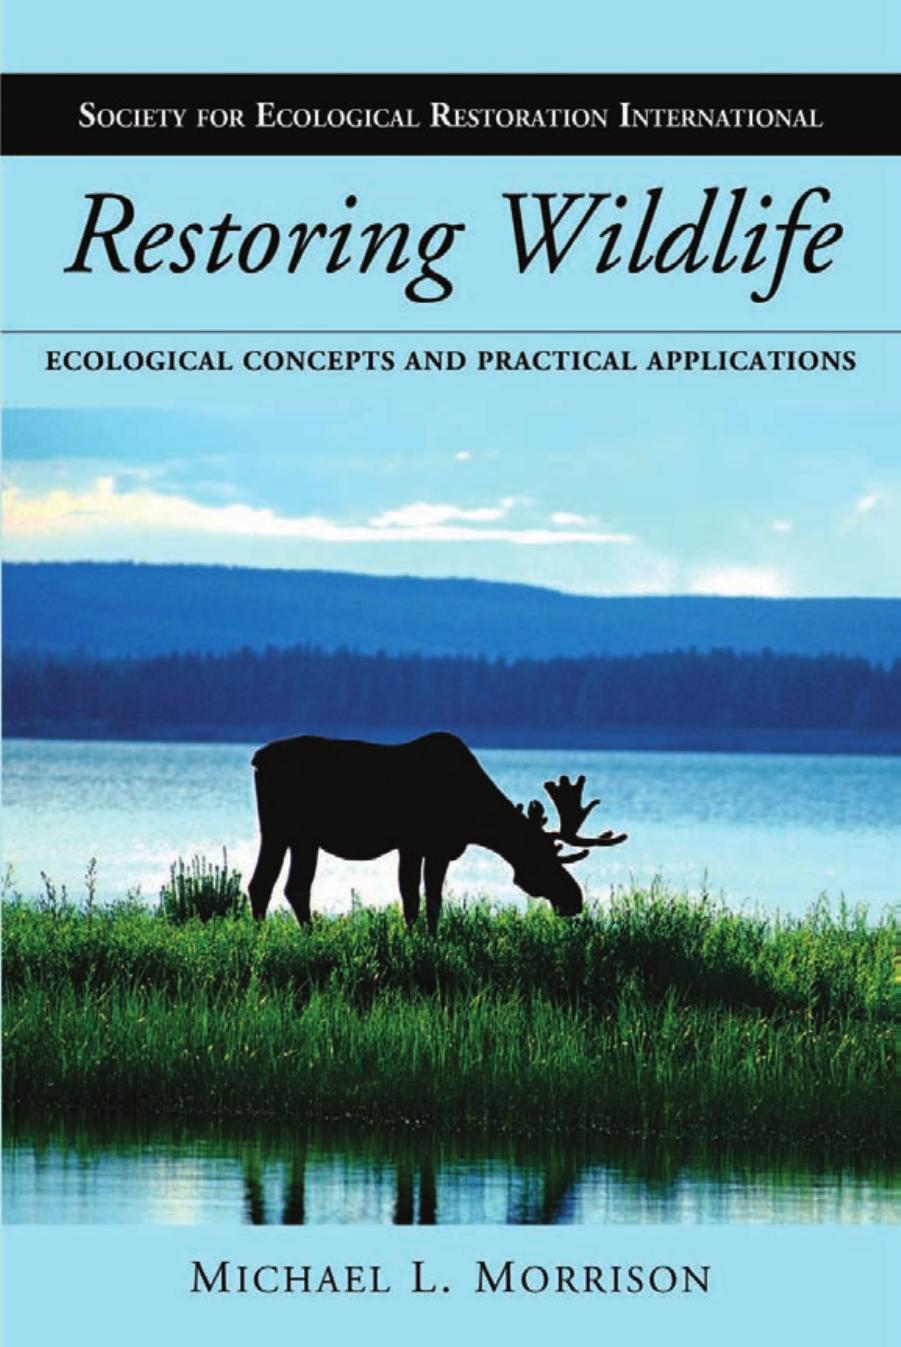 Restoring Wildlife: Ecological Concepts and Practical Applications by Michael L. Morrison